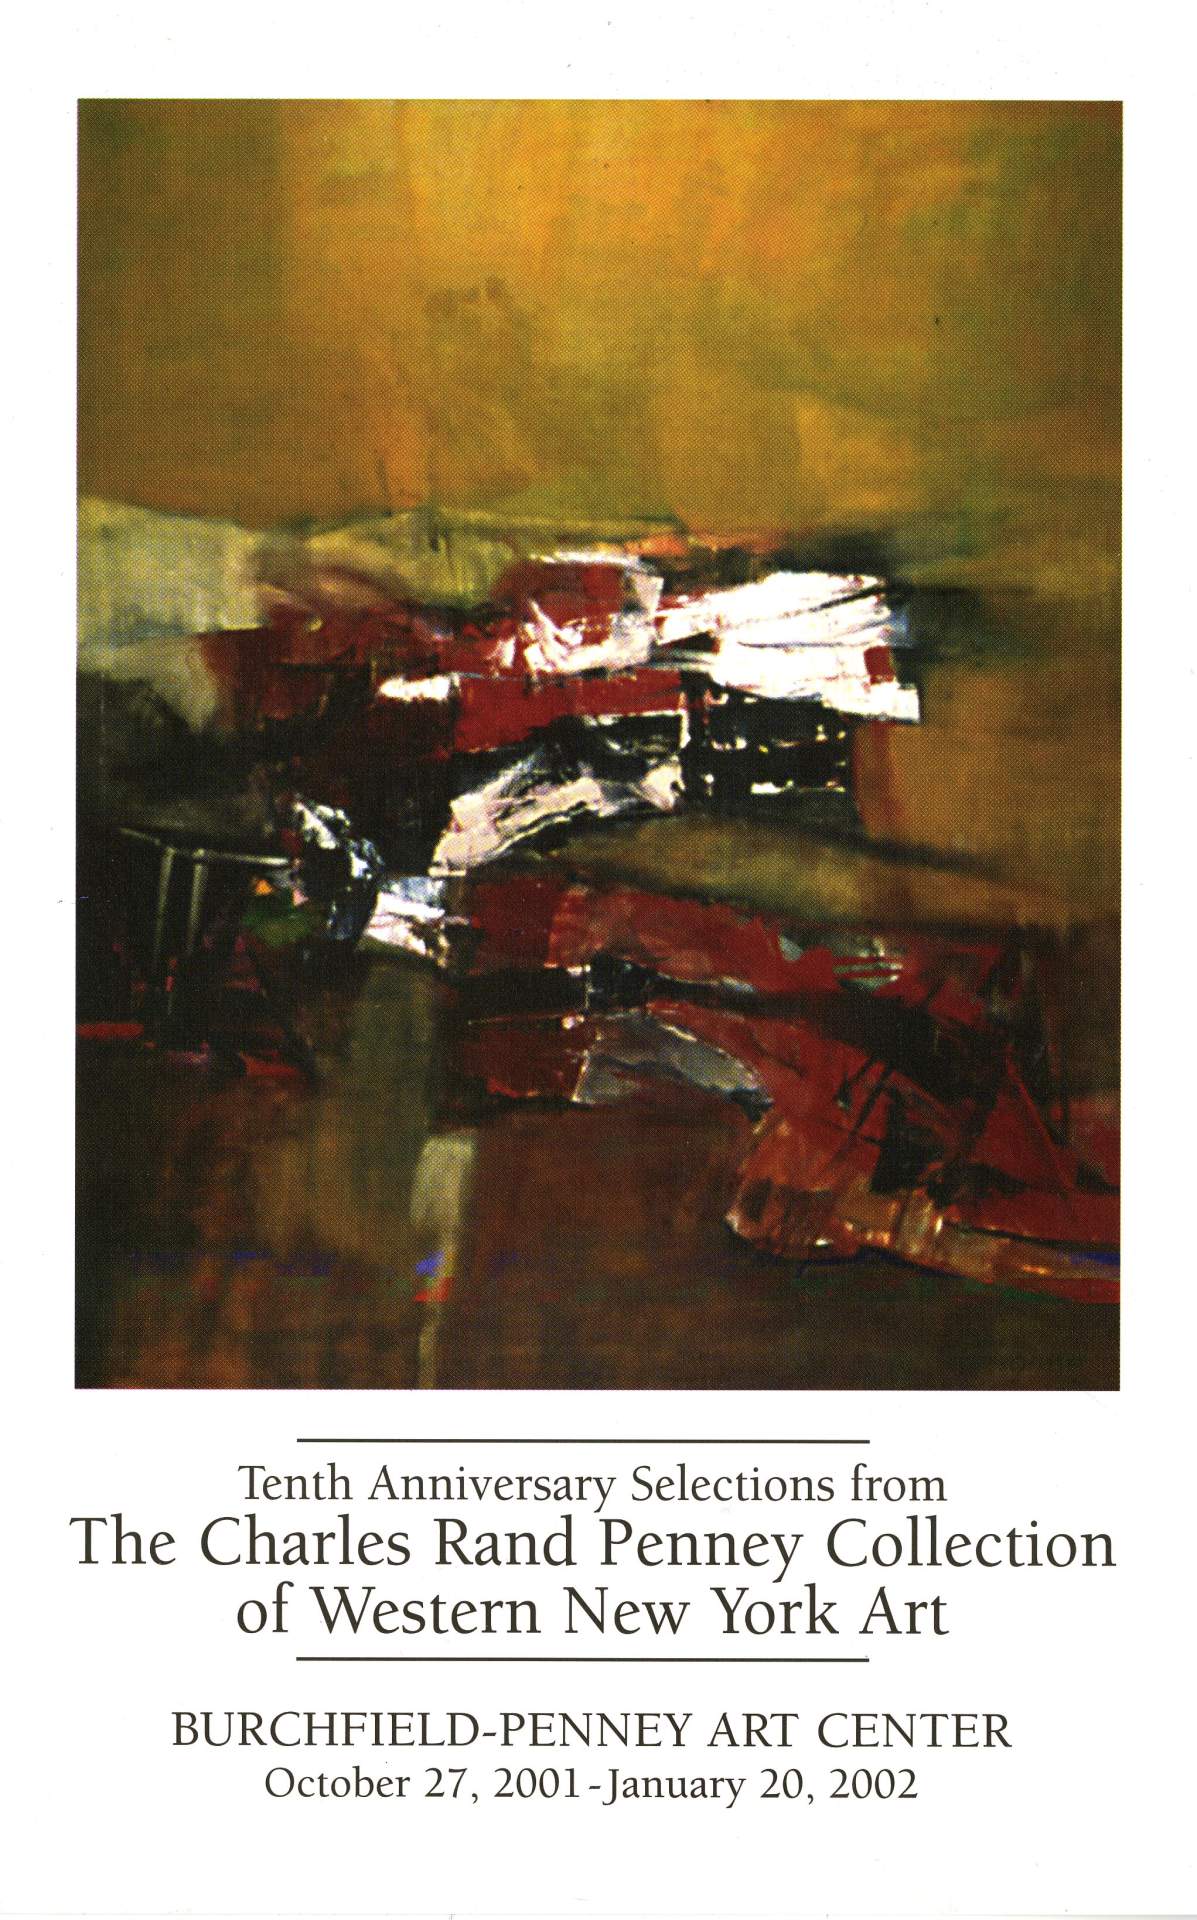 Tenth Anniversary Selections from the Charles Rand Penney Collection of Western New York Art